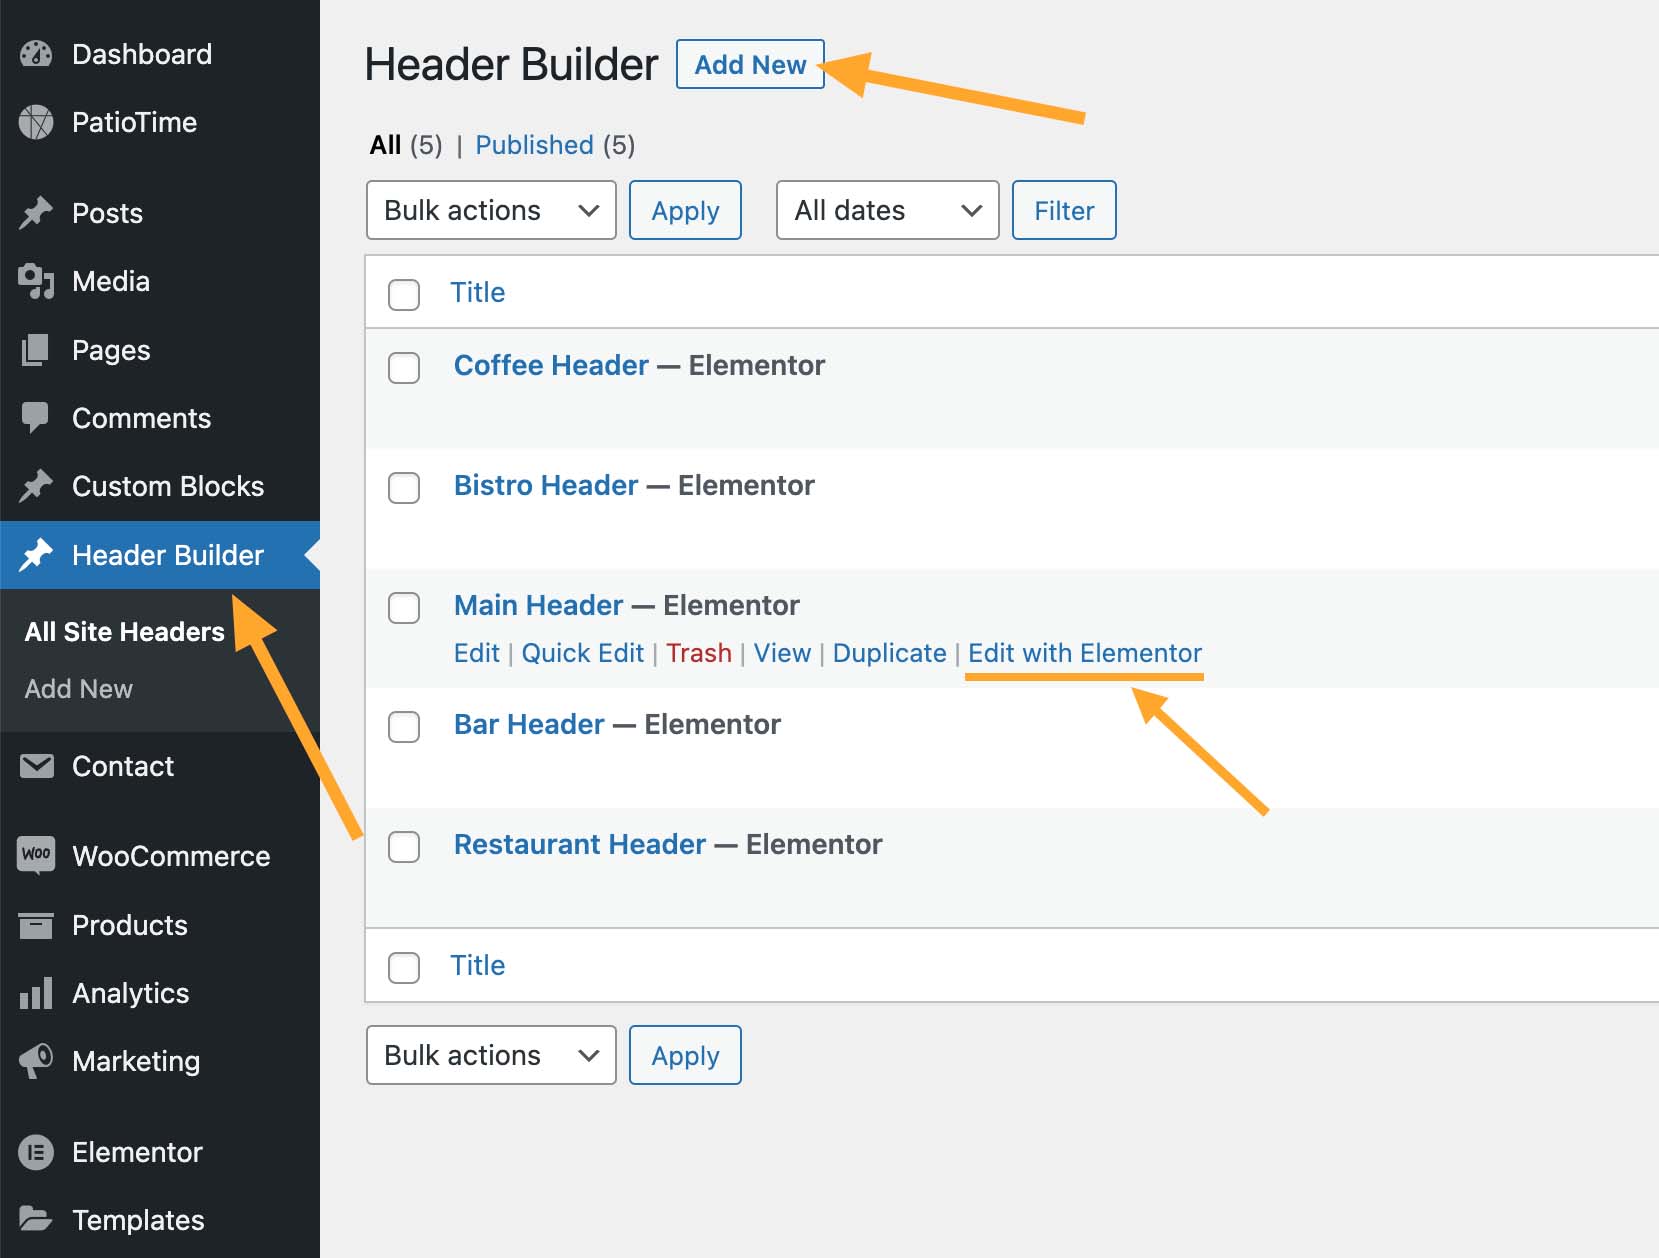 Manage all site headers